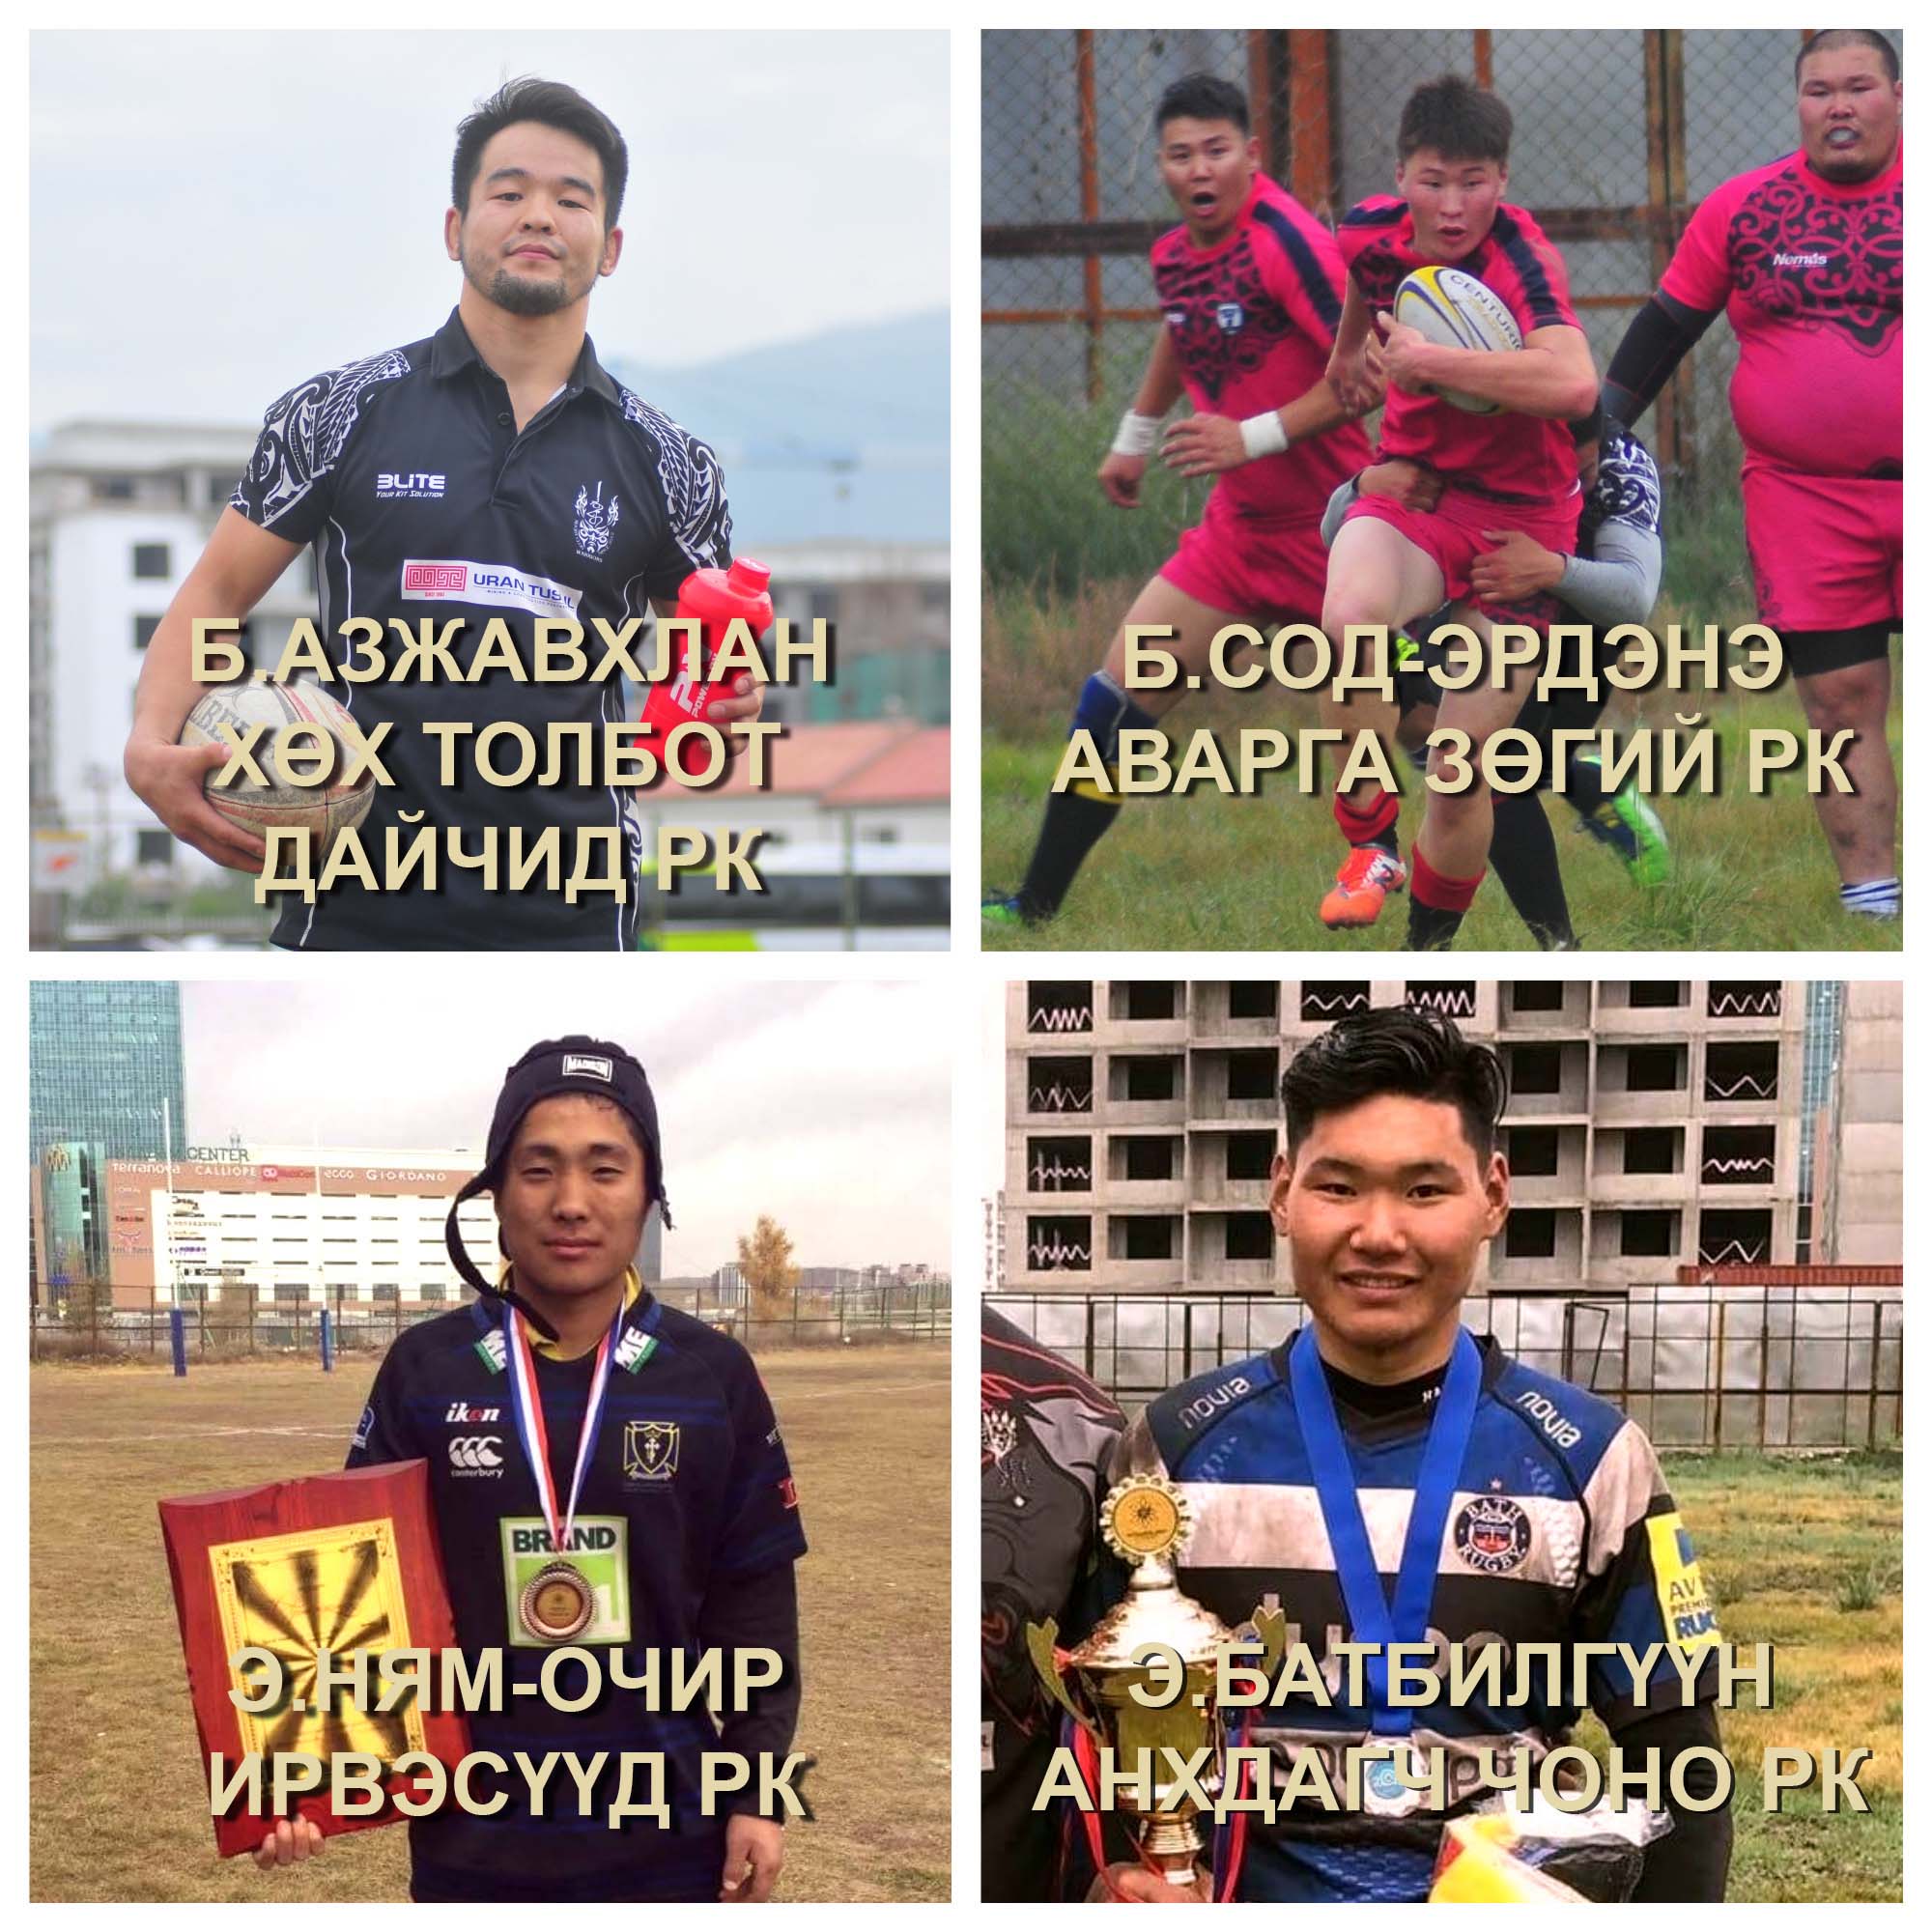 Mongolian rugby awards 2018 nominee